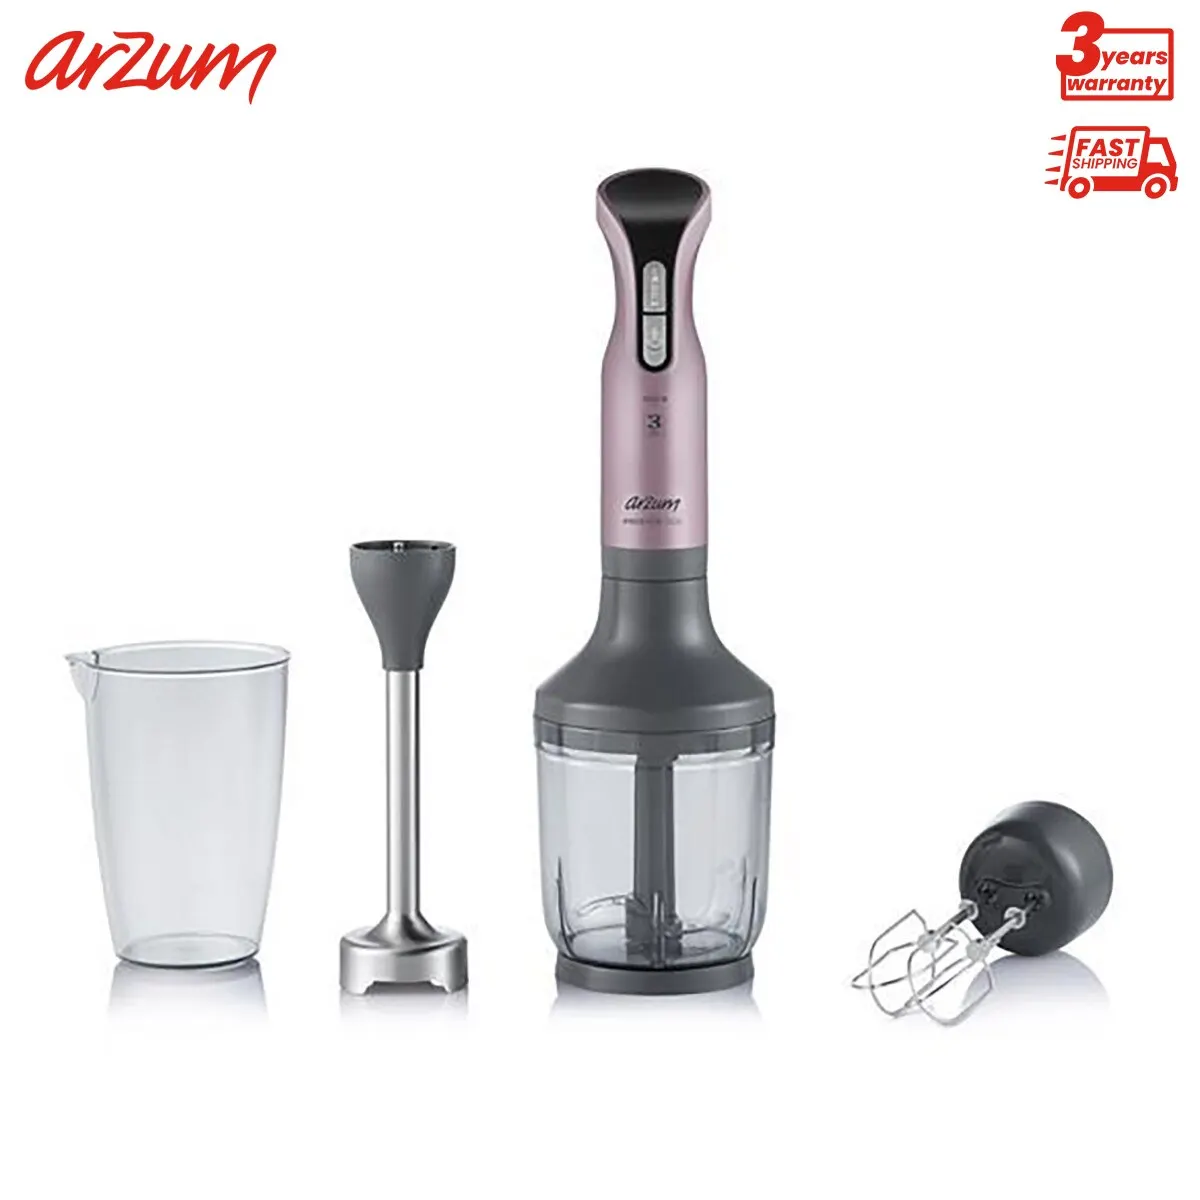 

My desire Prostick 1500 Dreamline Hand Blender Set Portable Electric with Stainless Steel Blades Kitchen Tools Food Preparation